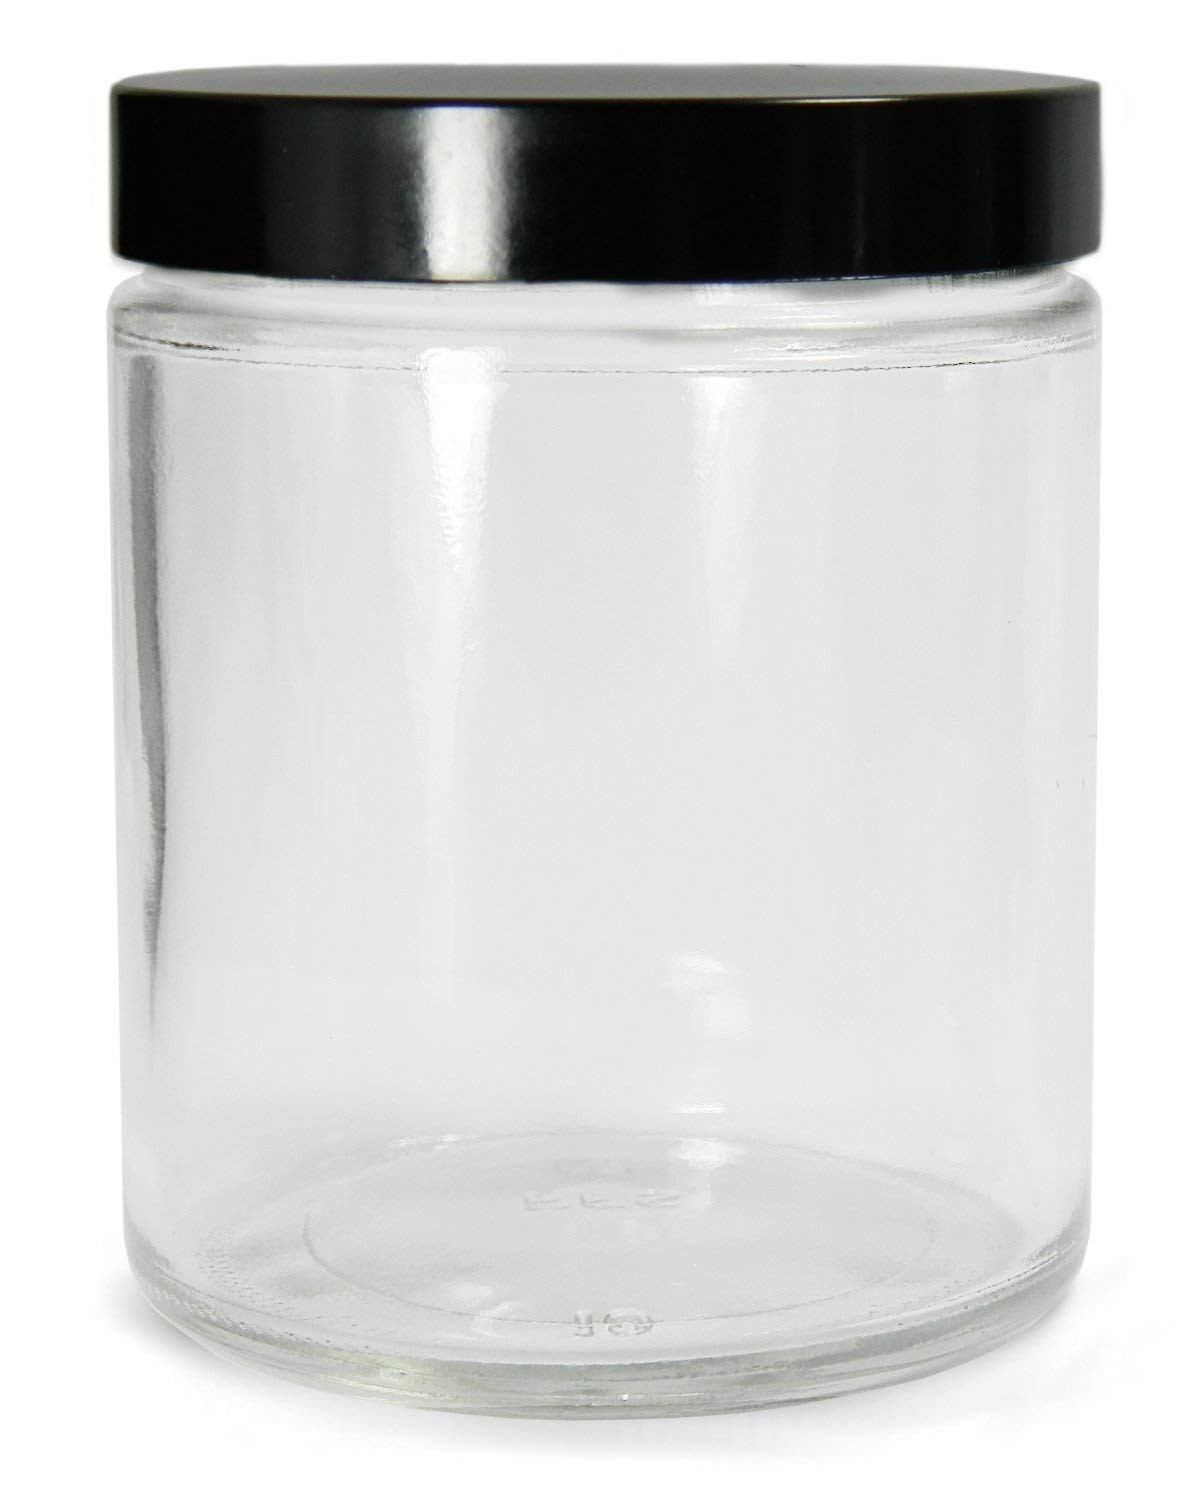 23 Lovely Tall Thick Glass Vase 2024 free download tall thick glass vase of qorpak glc 01629 clear glass ready to clean straight sided round for qorpak glc 01629 clear glass ready to clean straight sided round bottle with 58 400 black polypr